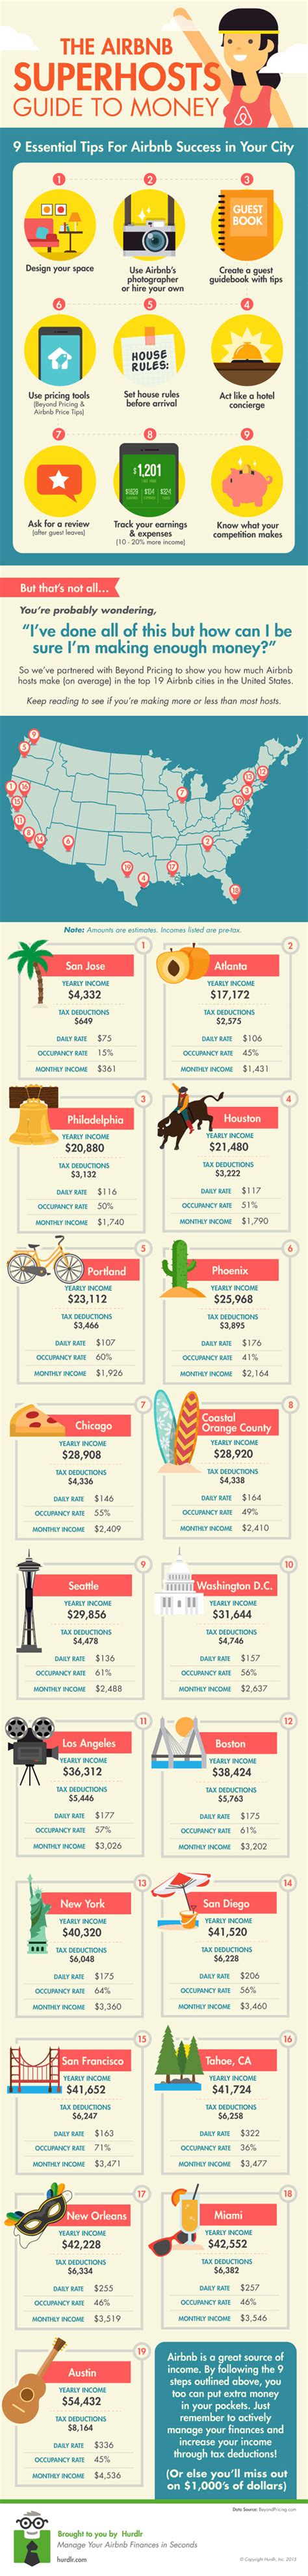 airbnb superhost guide  money  infographics